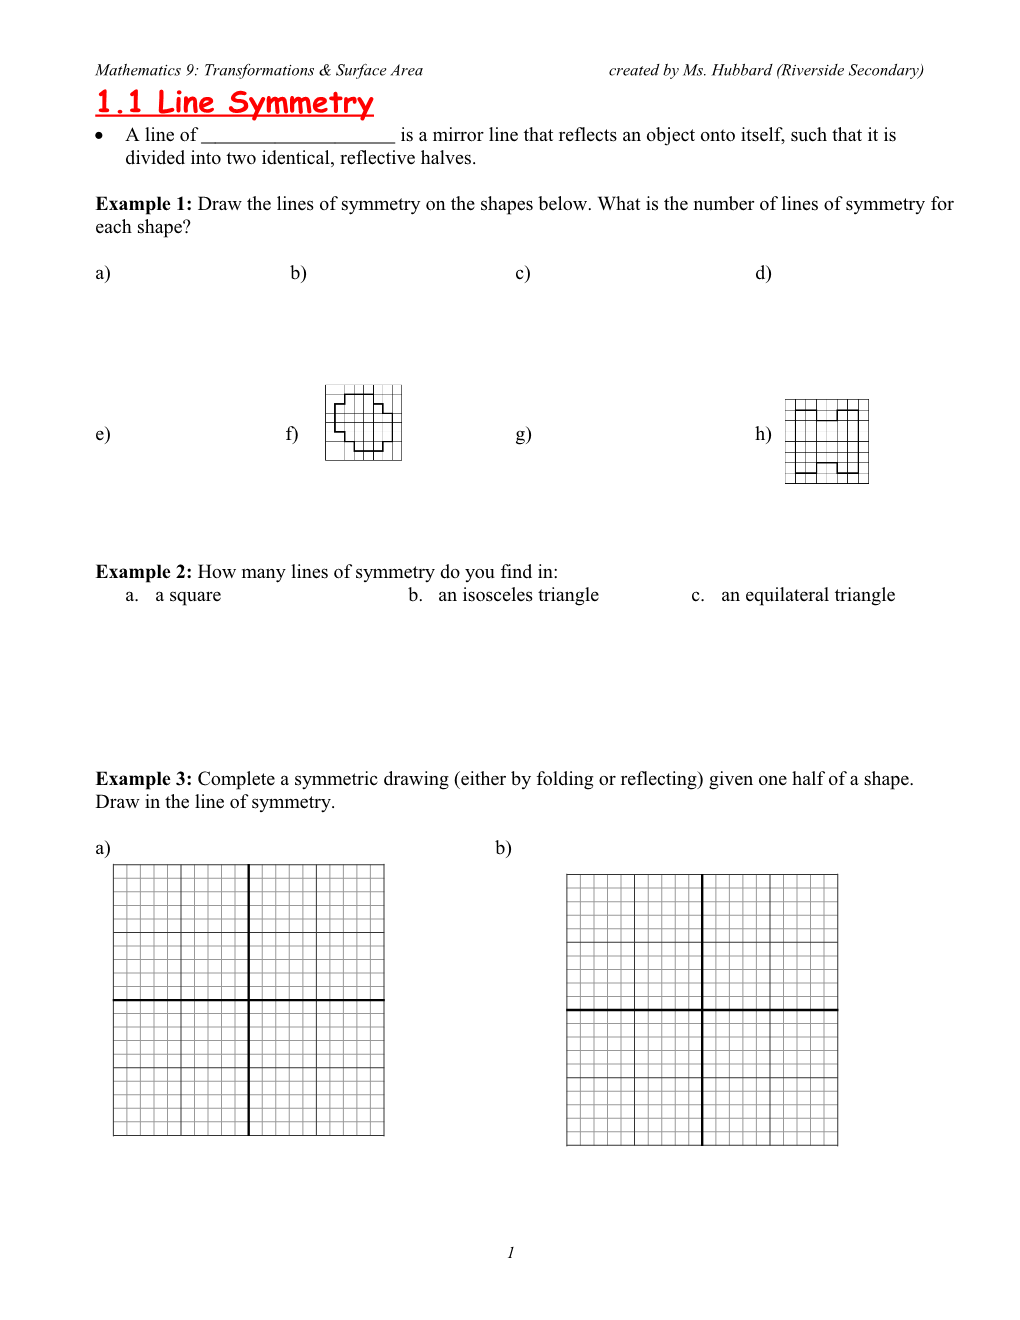 Mathematics 9: Transformations & Surface Areacreated by Ms. Hubbard (Riverside Secondary)